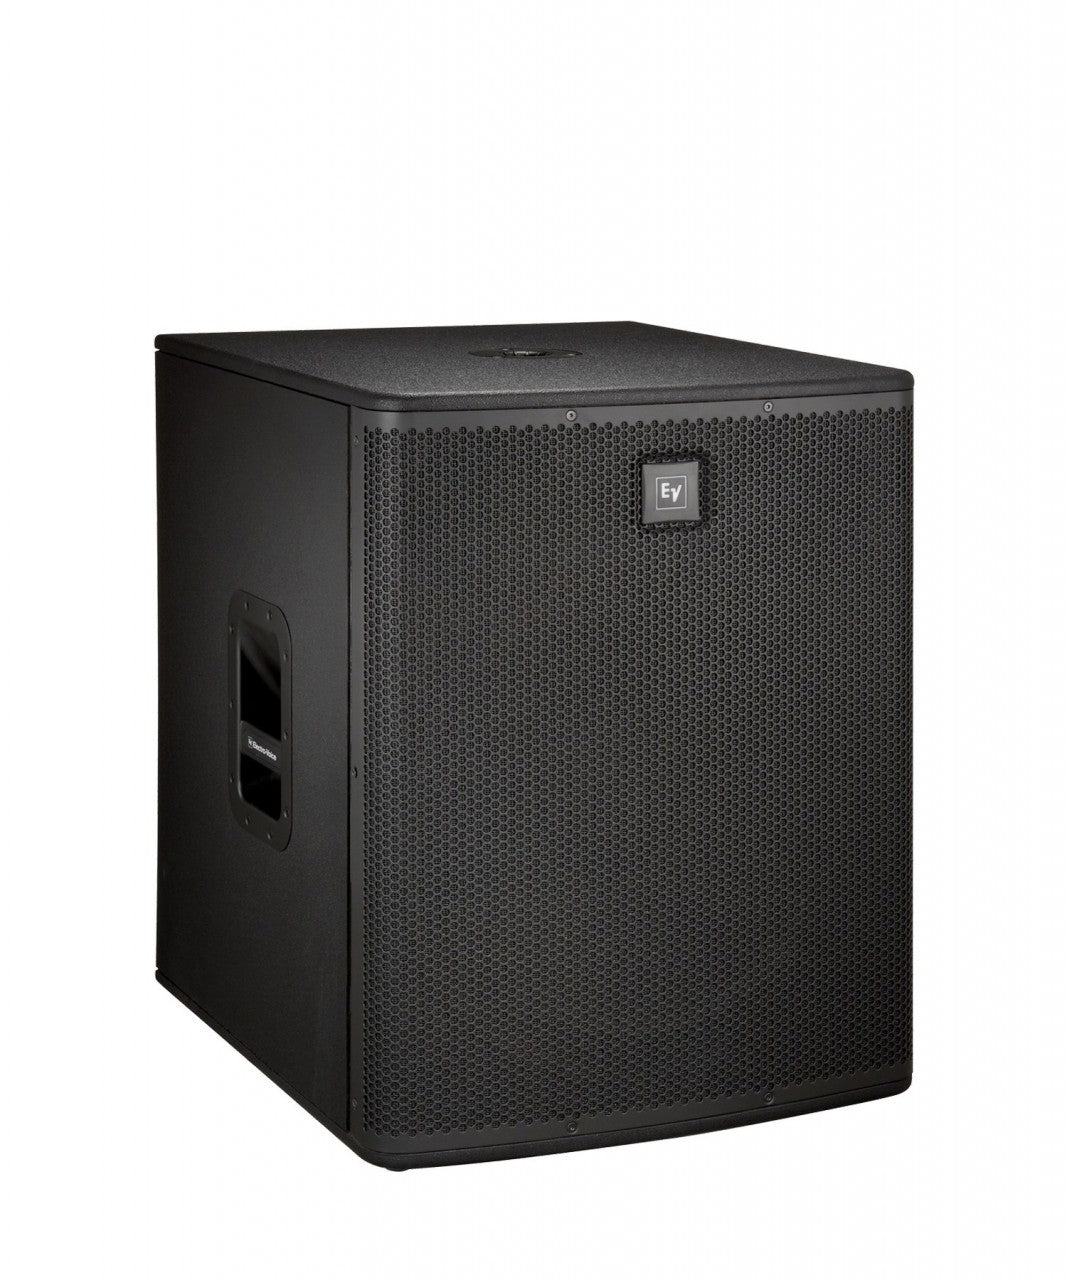 Electro-Voice ELX118 18-Inch Subwoofer